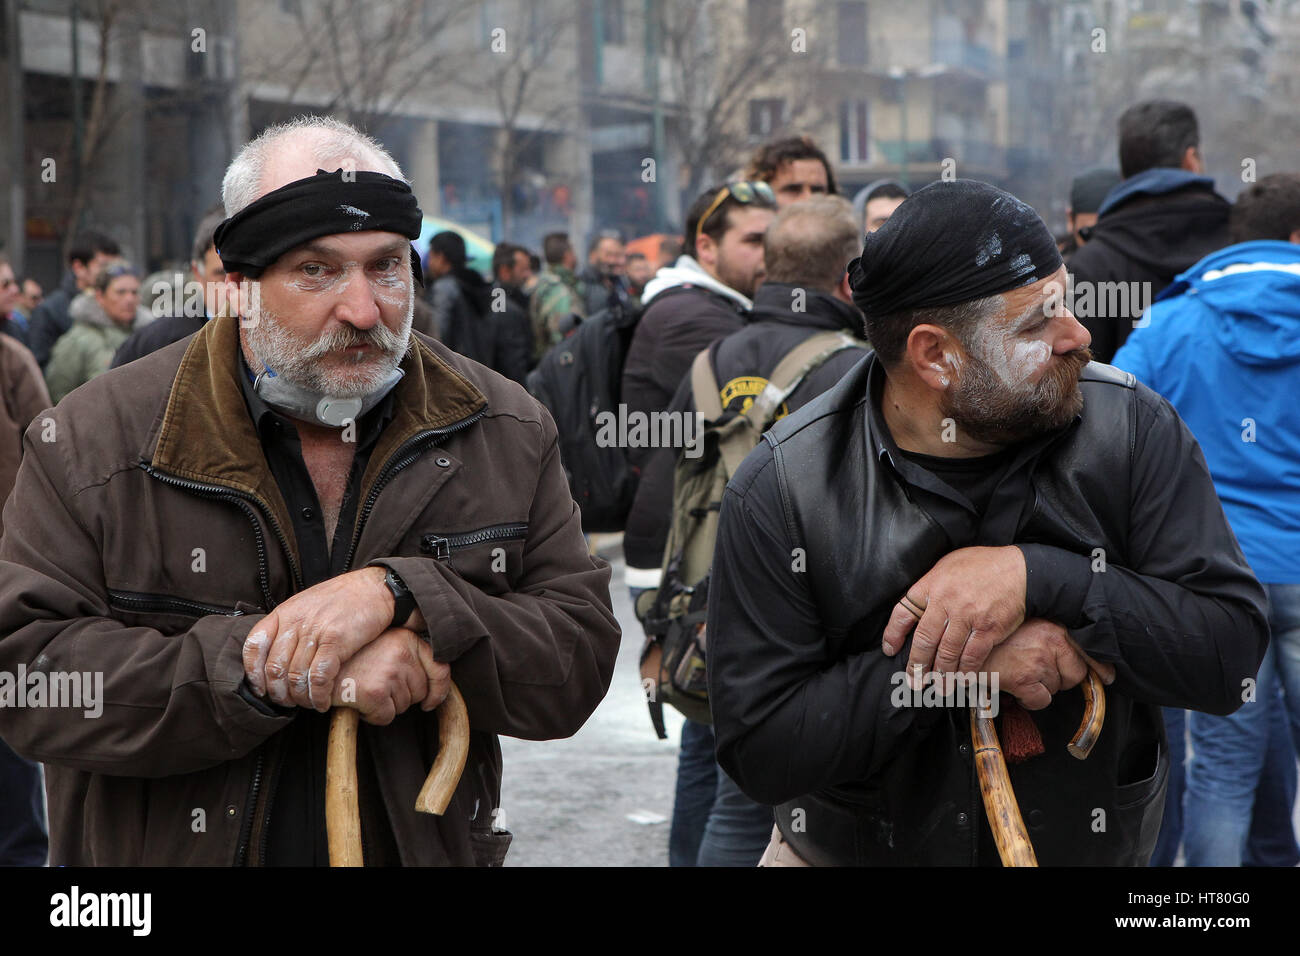 Athens, Greece. 8th Mar, 2017. Greek farmers protest in front of the Agriculture ministry in Athens, Greece, March 8, 2017. Farmers protested against the new austerity measures the government implements under the bailout program. Credit: Marios Lolos/Xinhua/Alamy Live News Stock Photo